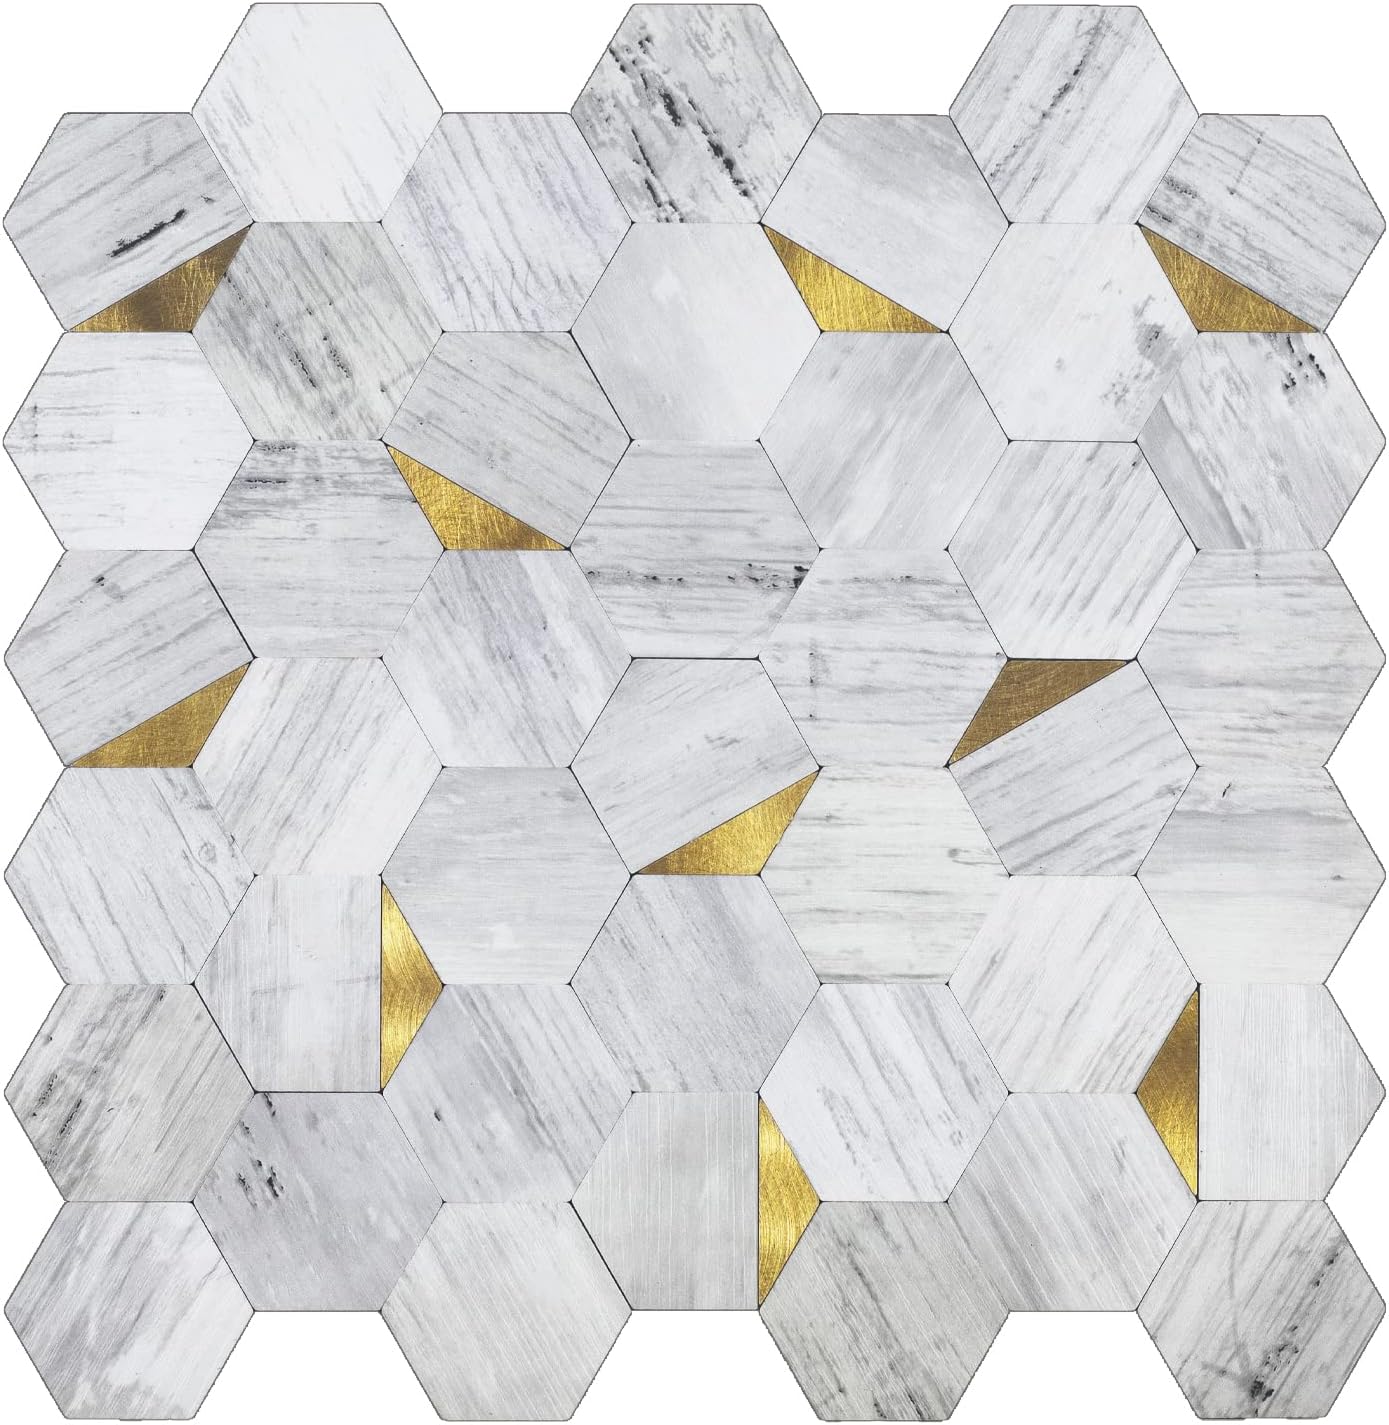 Midcard 10 Seamless Hexagonal Tiles with Peel and Stick Backsplash, PVC Mosaic Tiles for Kitchens and Bathrooms